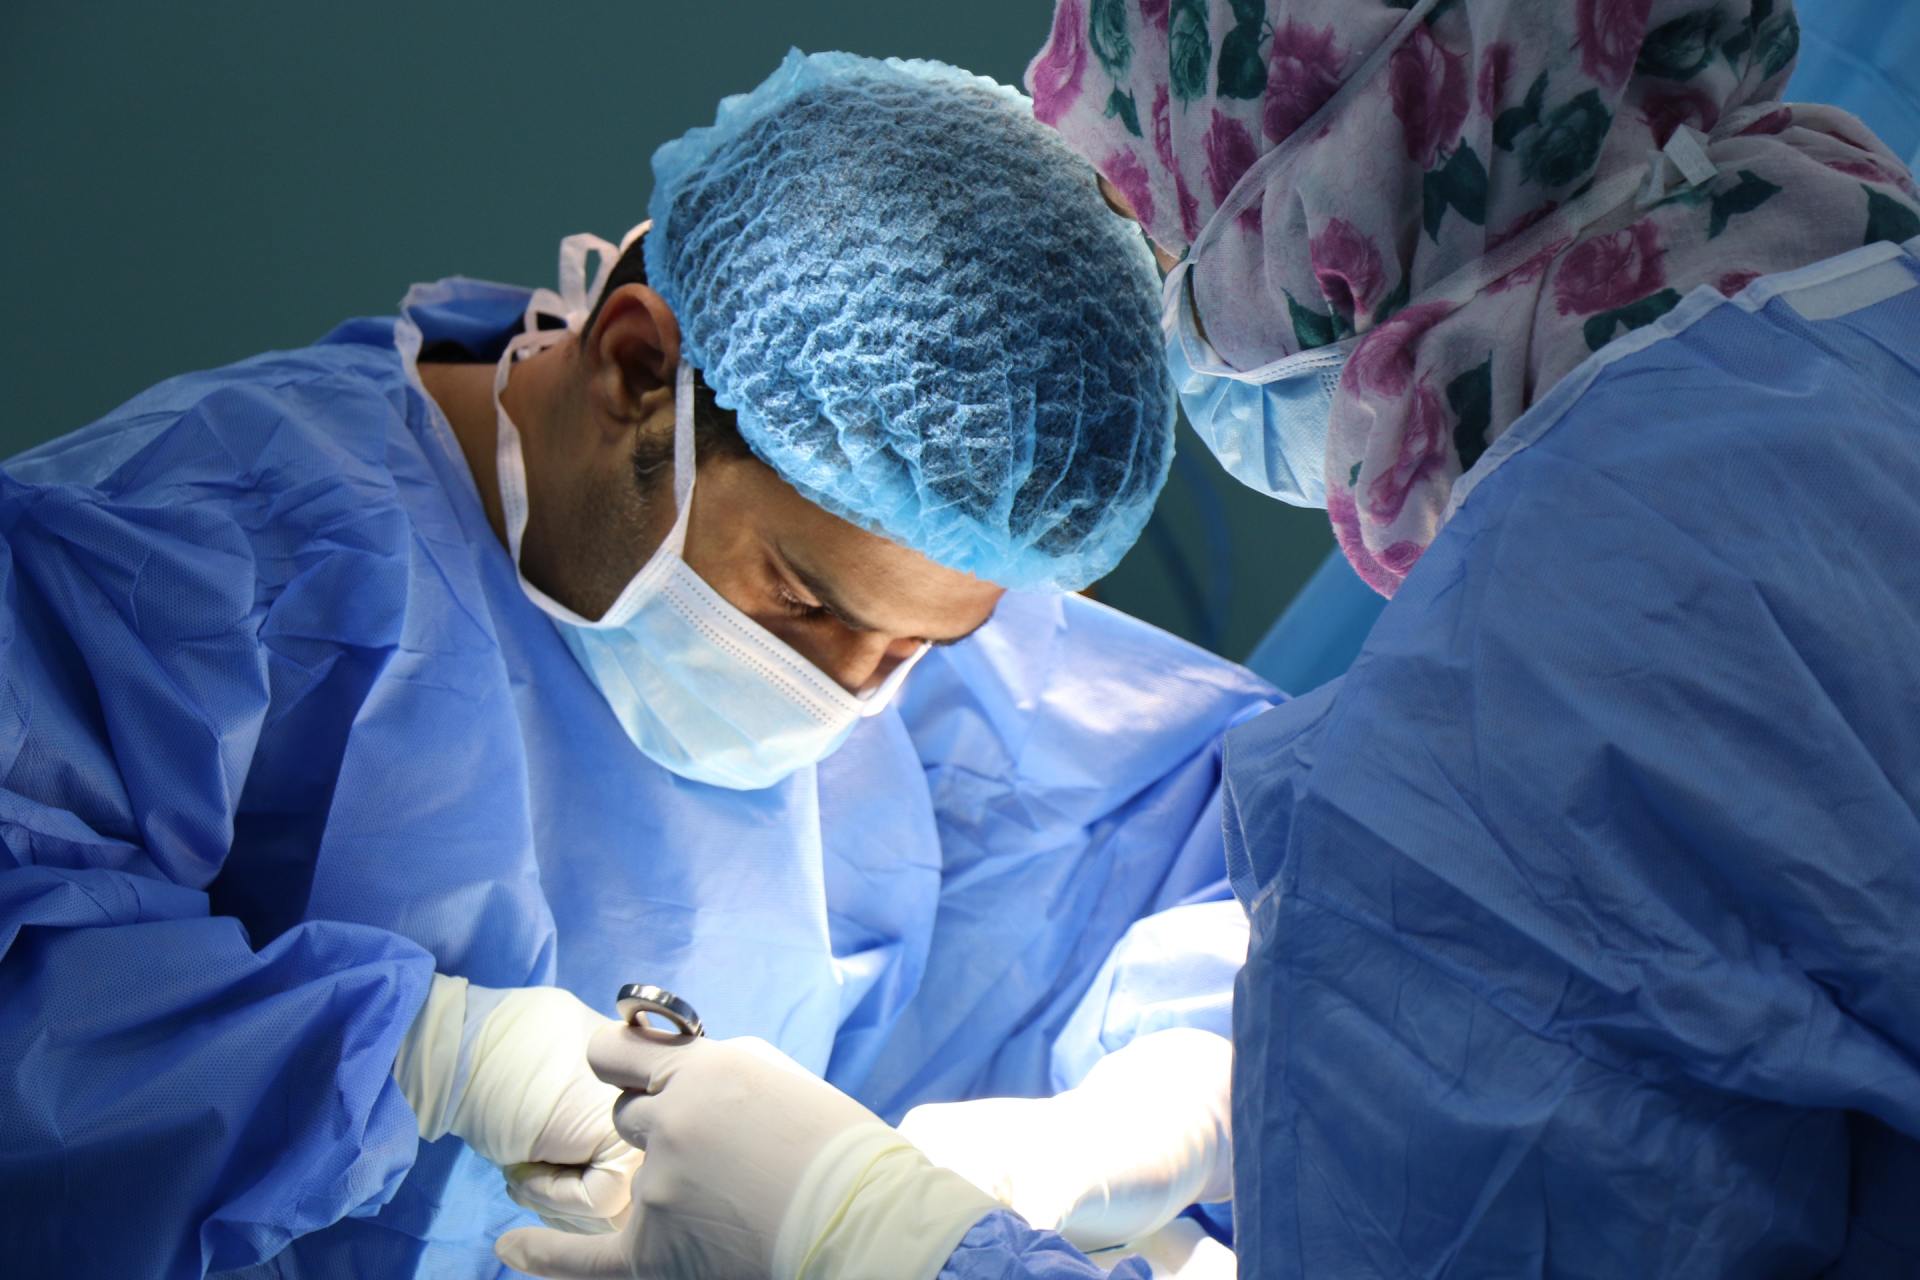 A surgeon is operating on a patient in an operating room.